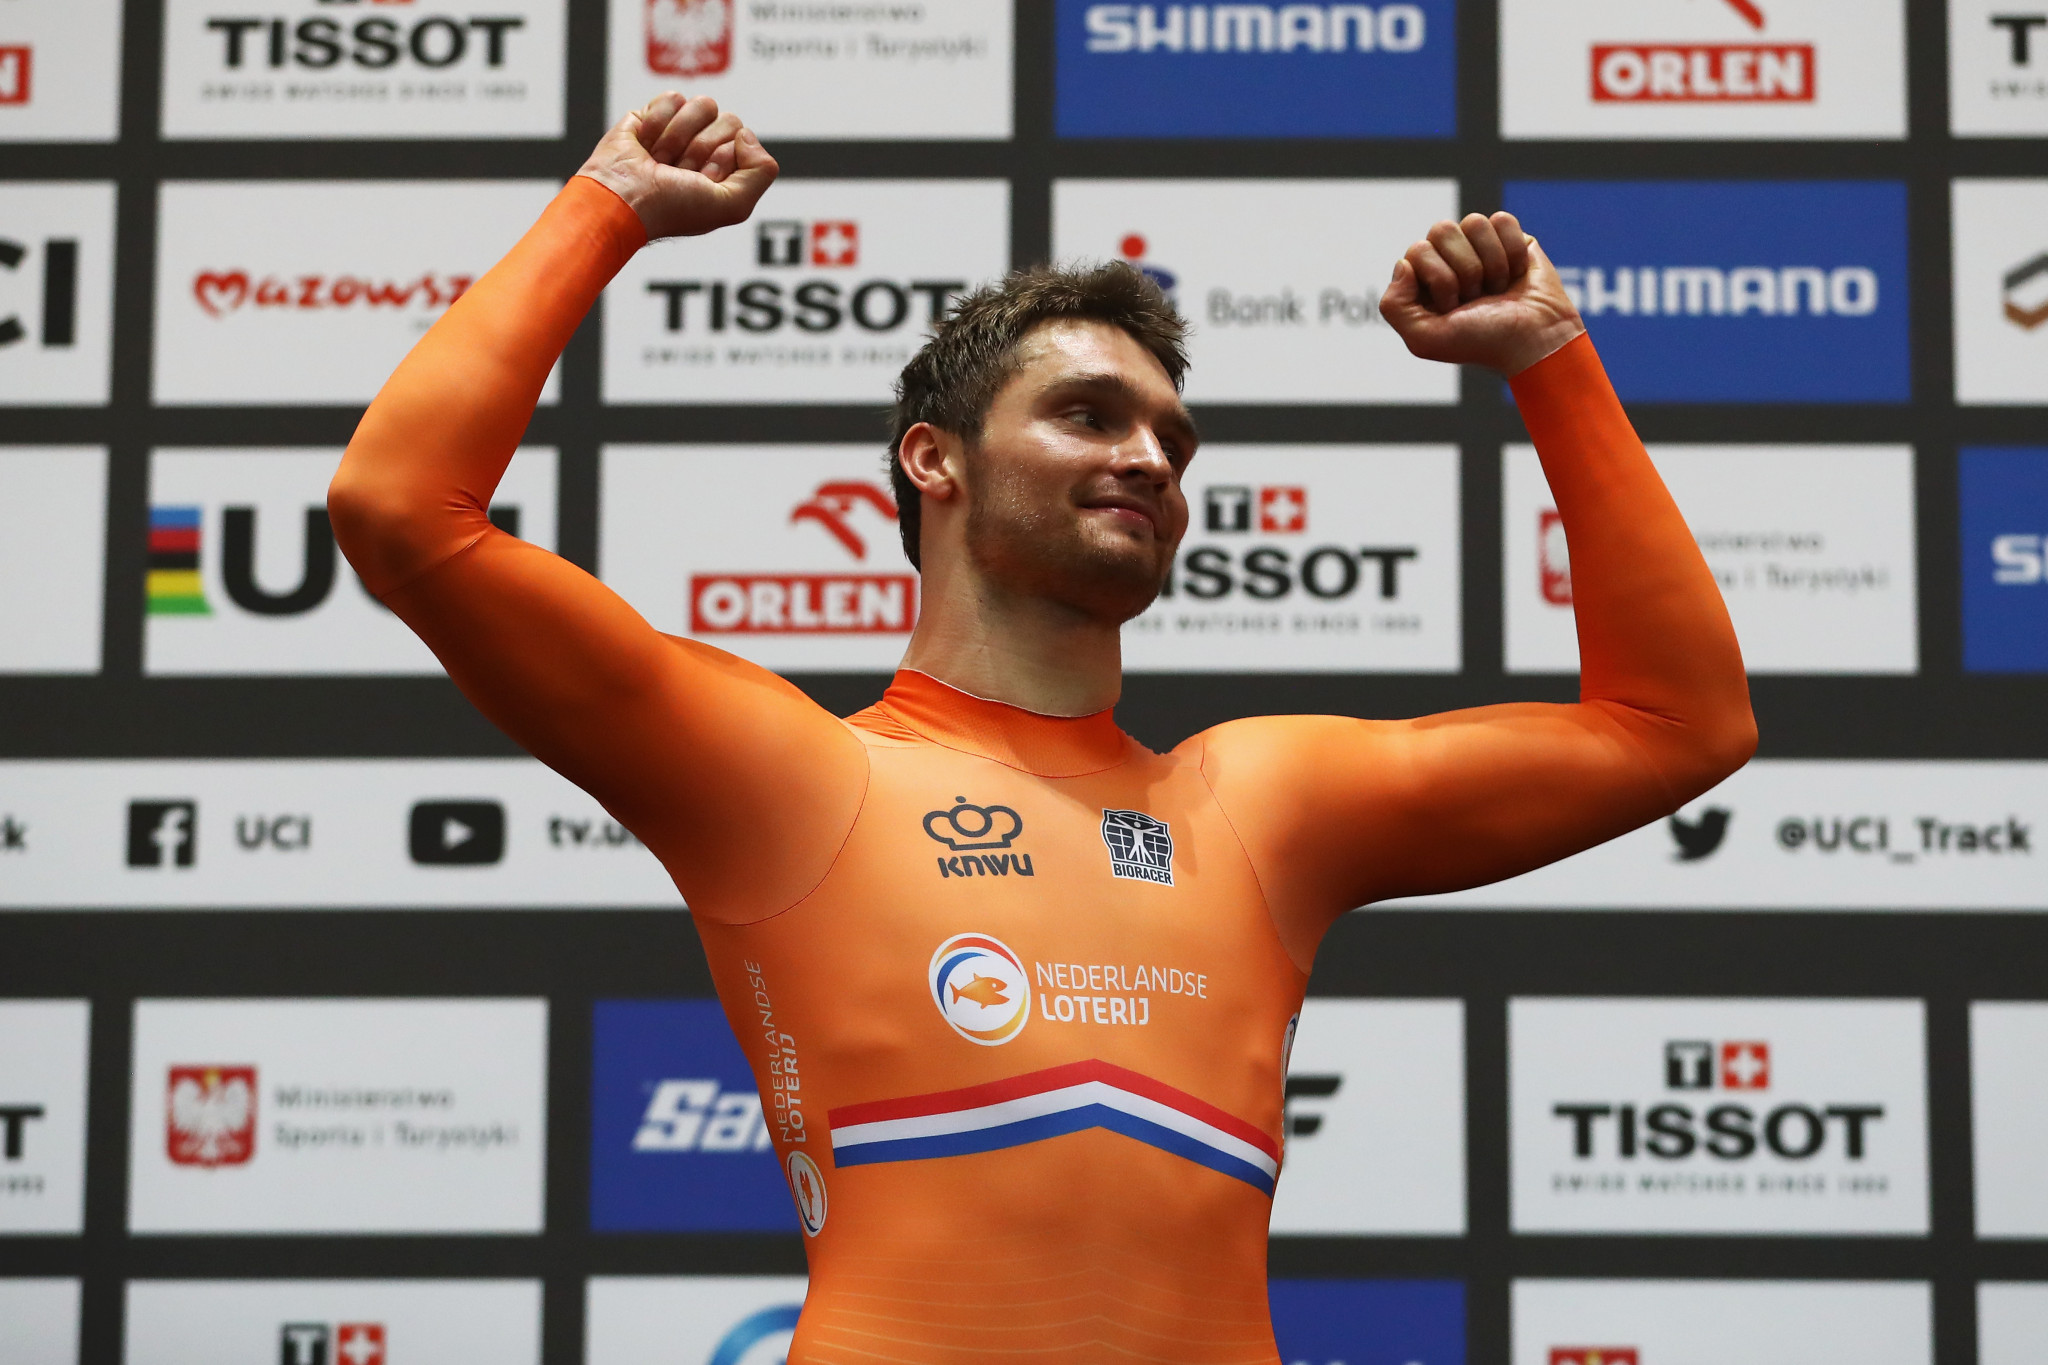 Matthijs Büchli won the men's keirin to claim his second title in Poland ©Getty Images